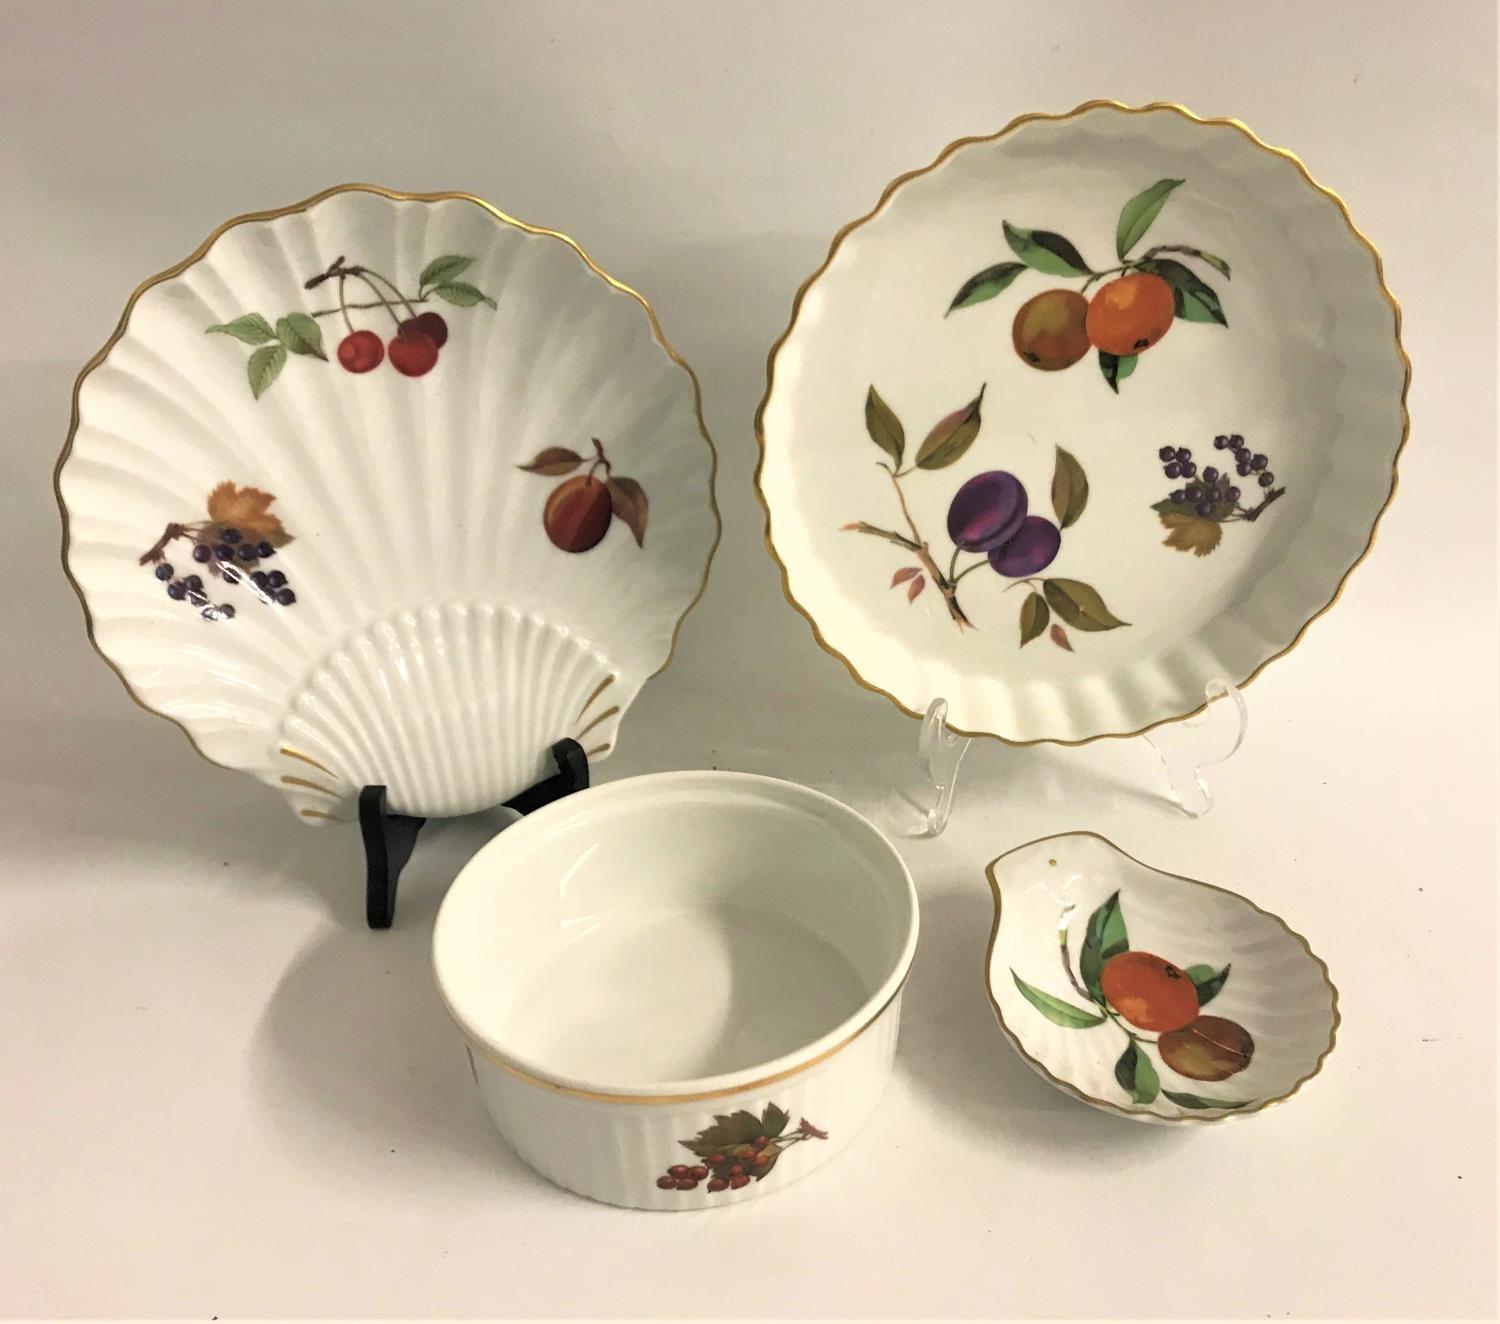 SELECTION OF ROYAL WORCESTER including a flan dish, small circular pie dish, a large and a small